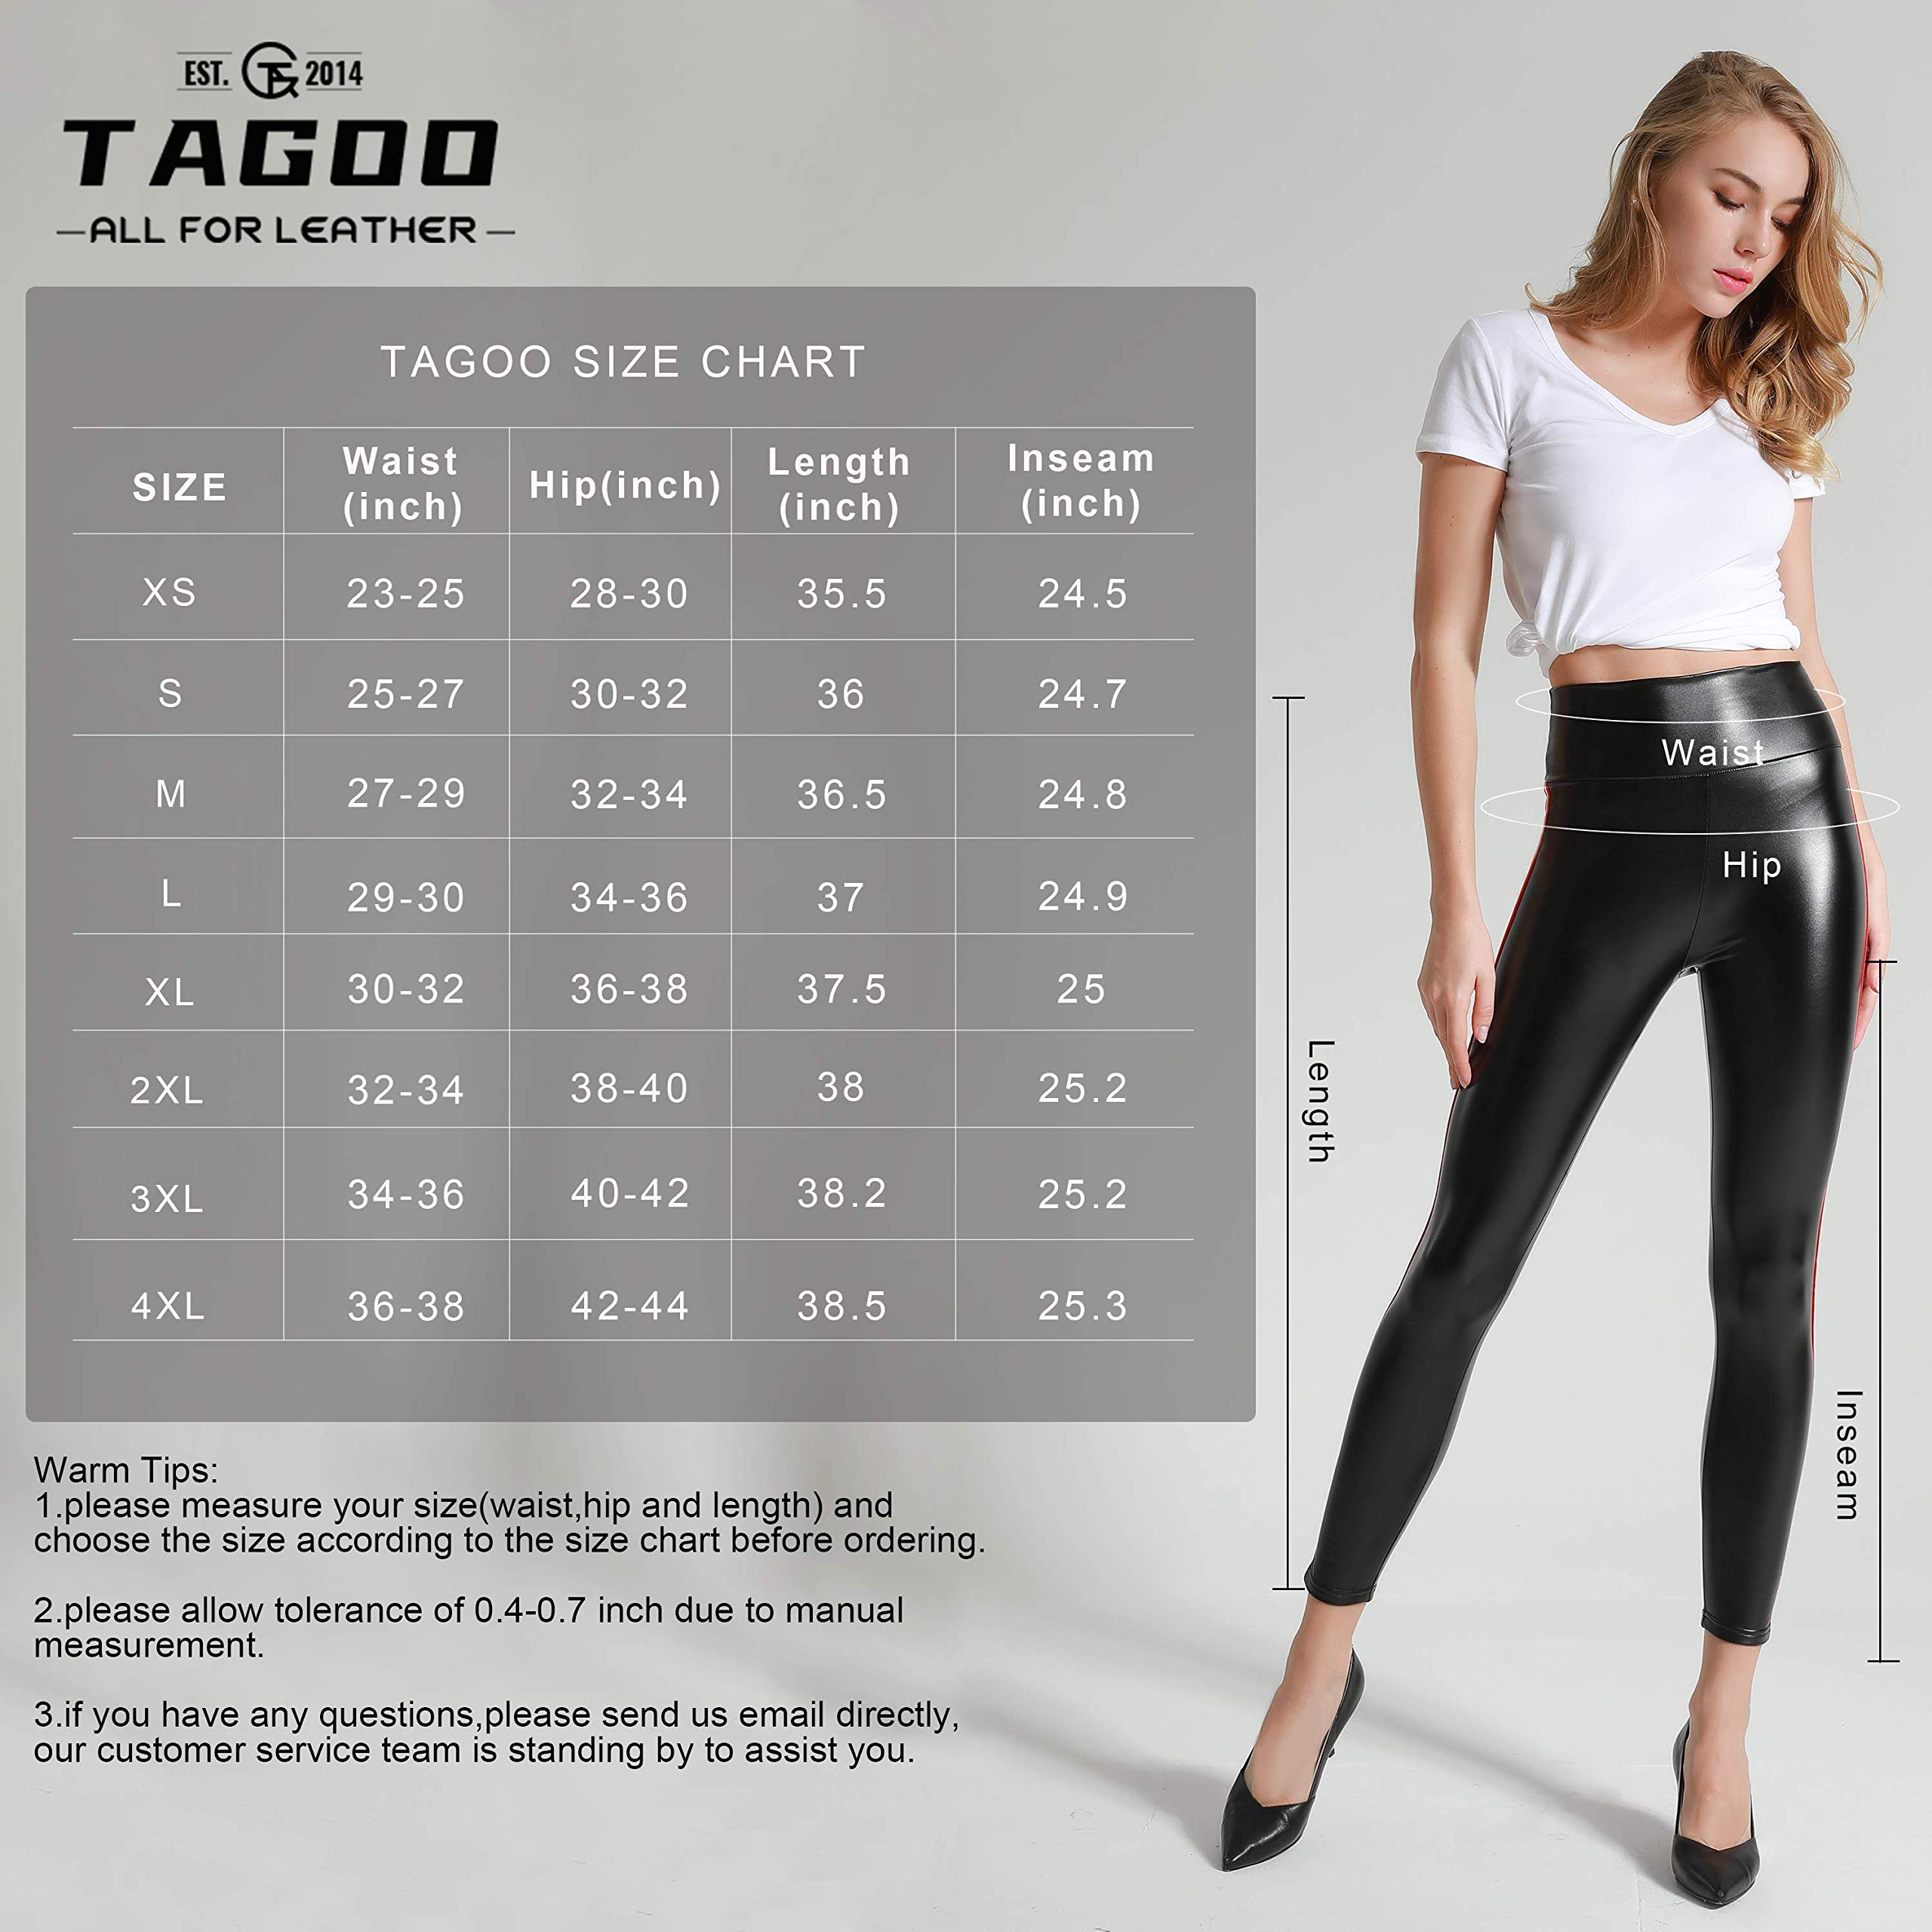 Tagoo Women's Stretchy Faux Leather Leggings Pants, Sexy Red High Waisted Tights